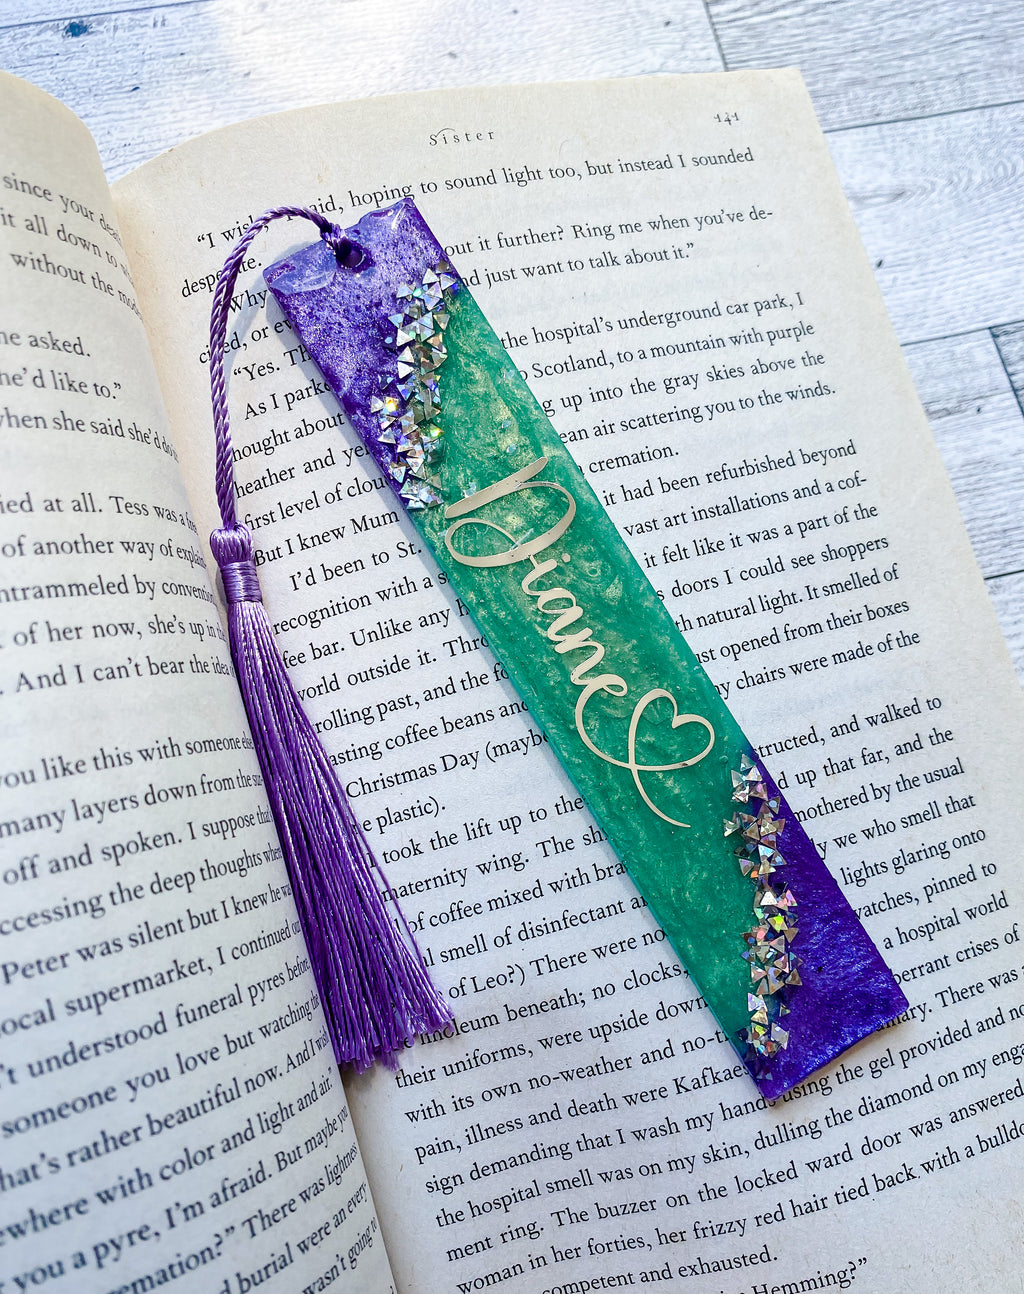 Personalized your own book mark!